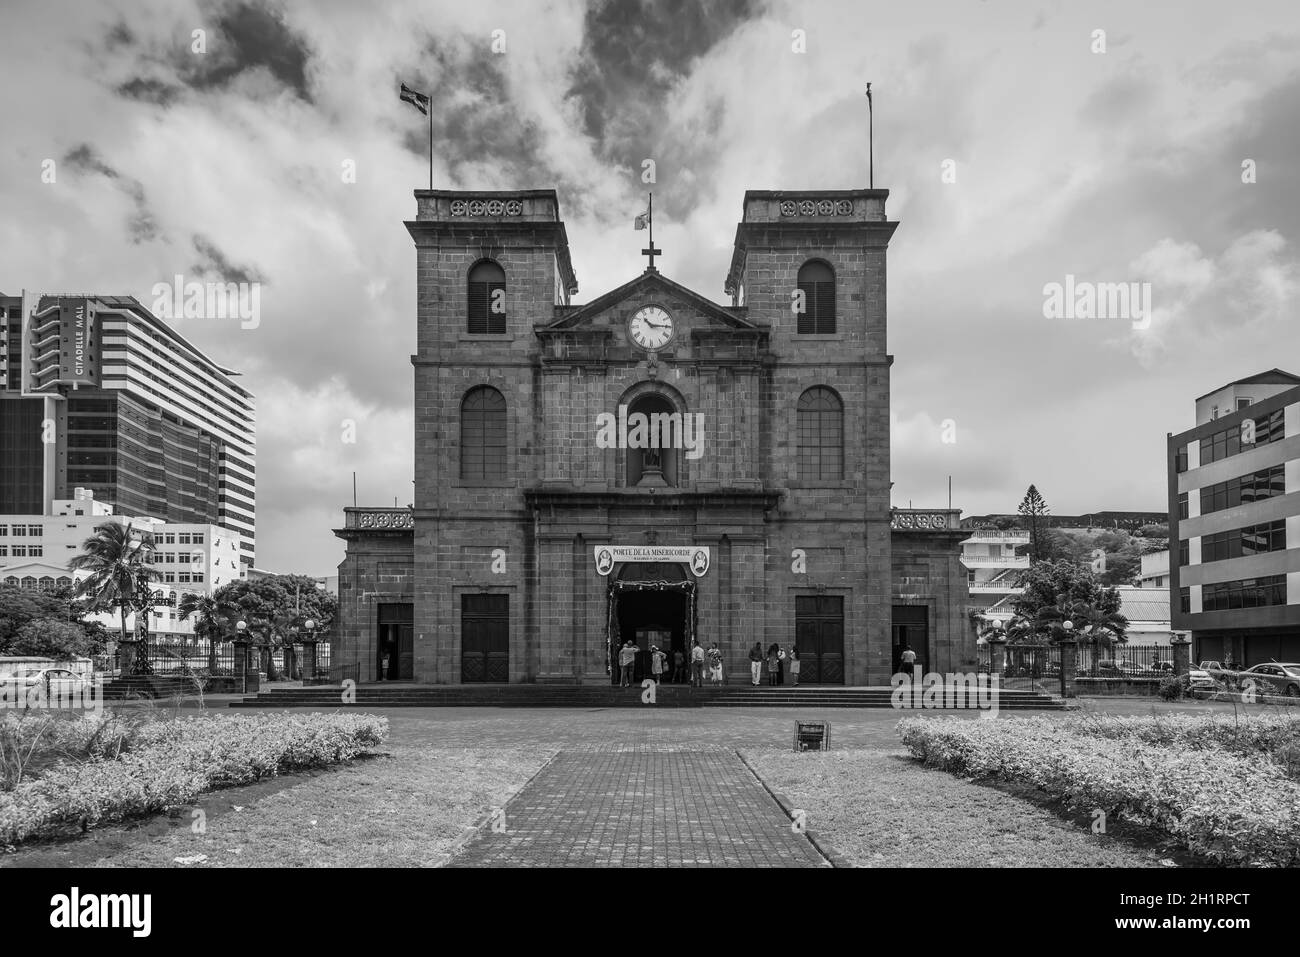 Port Louis, Mauritius - December 25, 2015: Exterior of the church of Immaculate Conception (Cathedral of St. Louis) in Port Louis, Mauritius. Black an Stock Photo